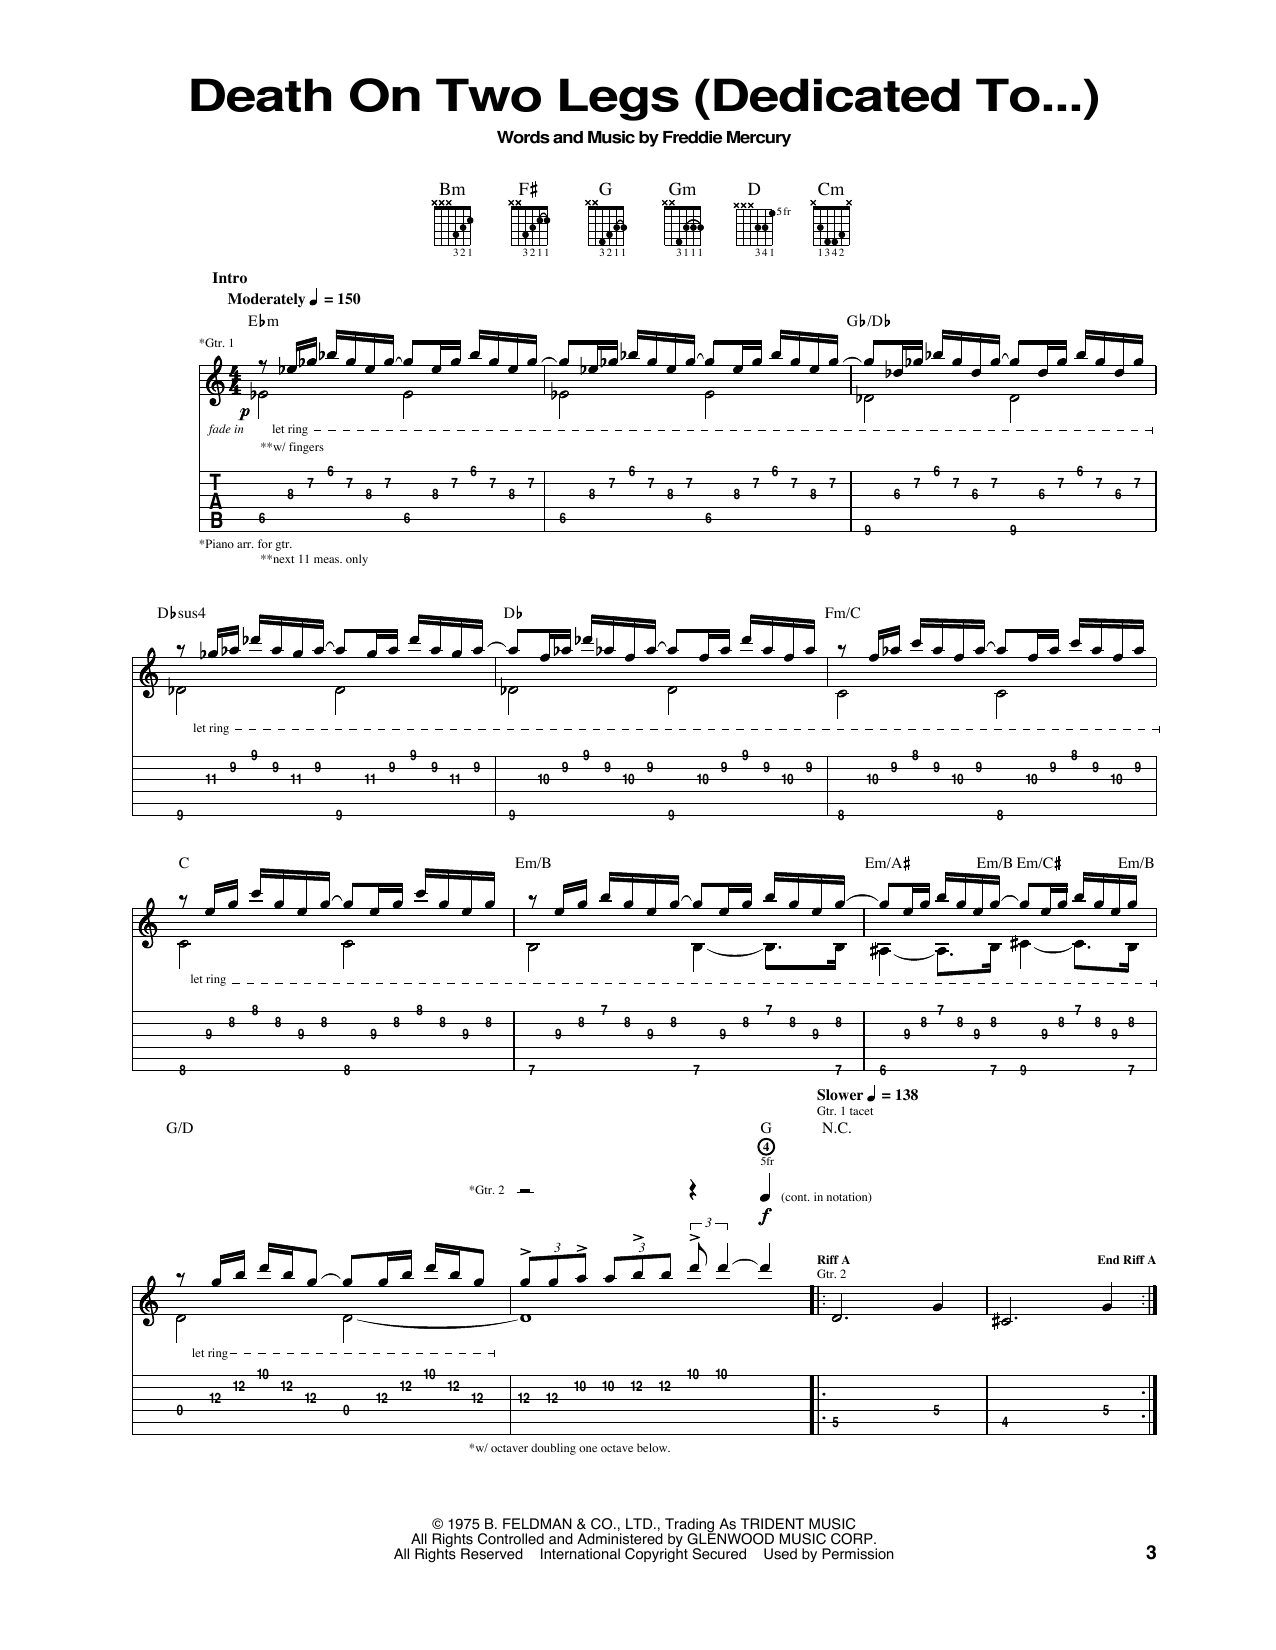 Download Queen Death On Two Legs Sheet Music